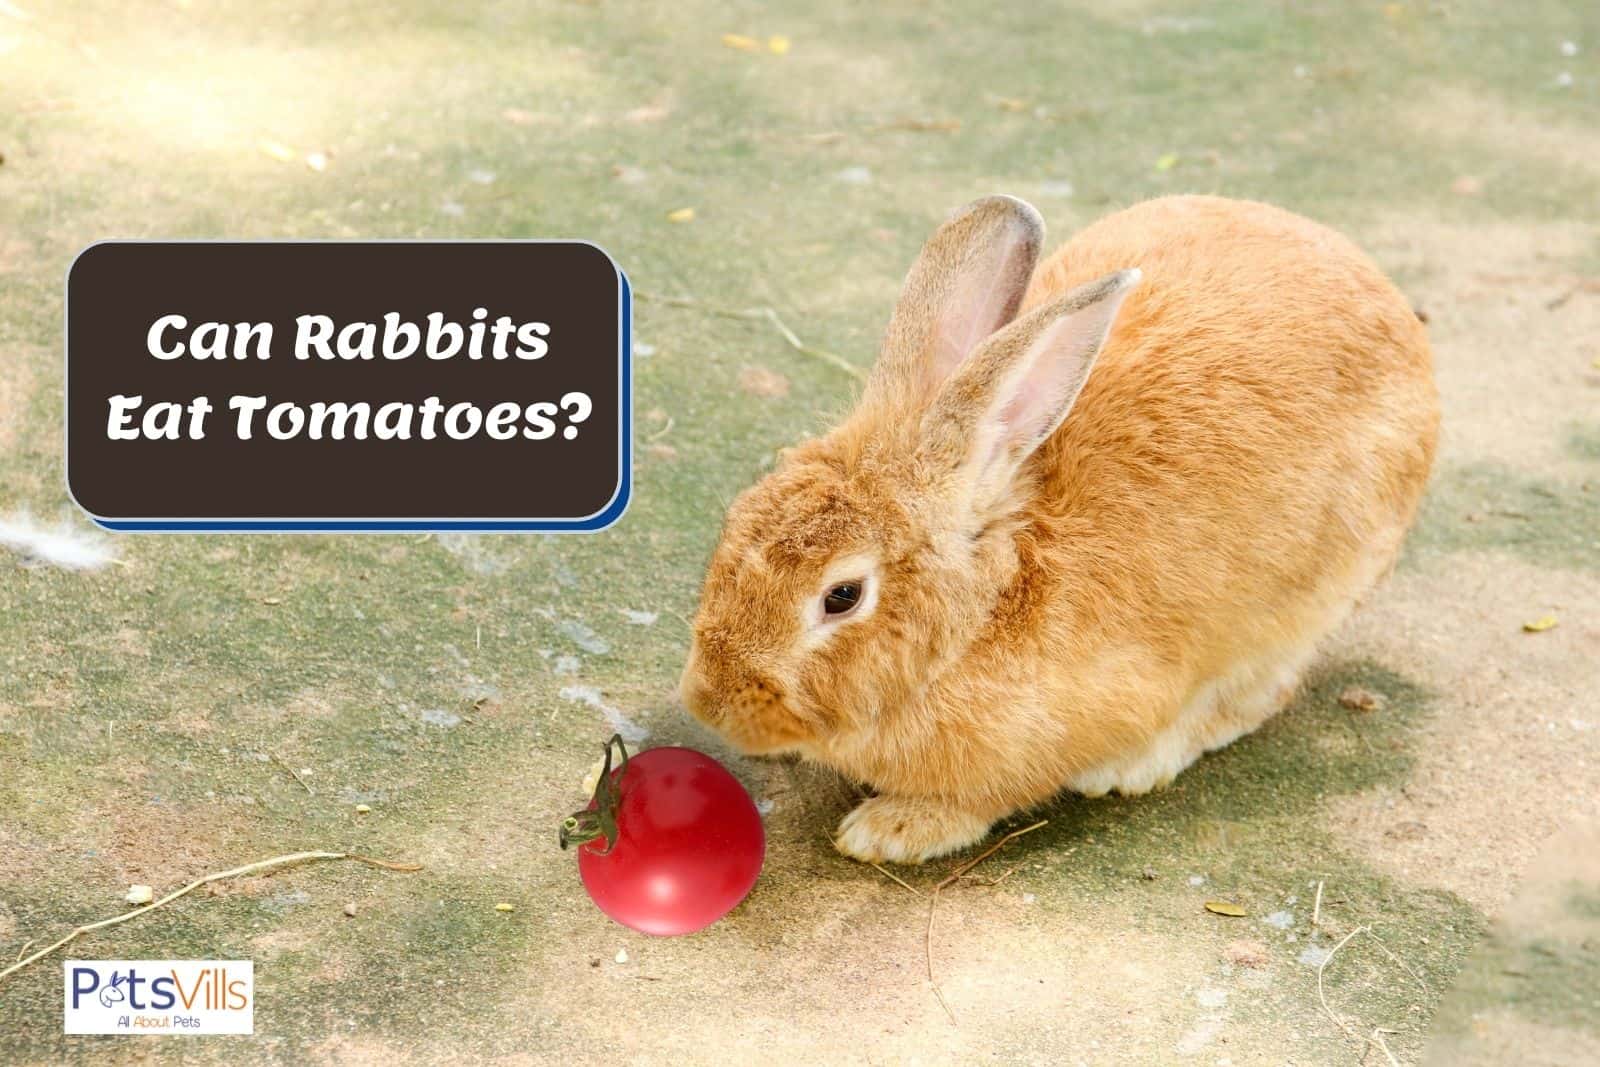 a rabbit trying to eat tomato, can rabbits eat tomatoe